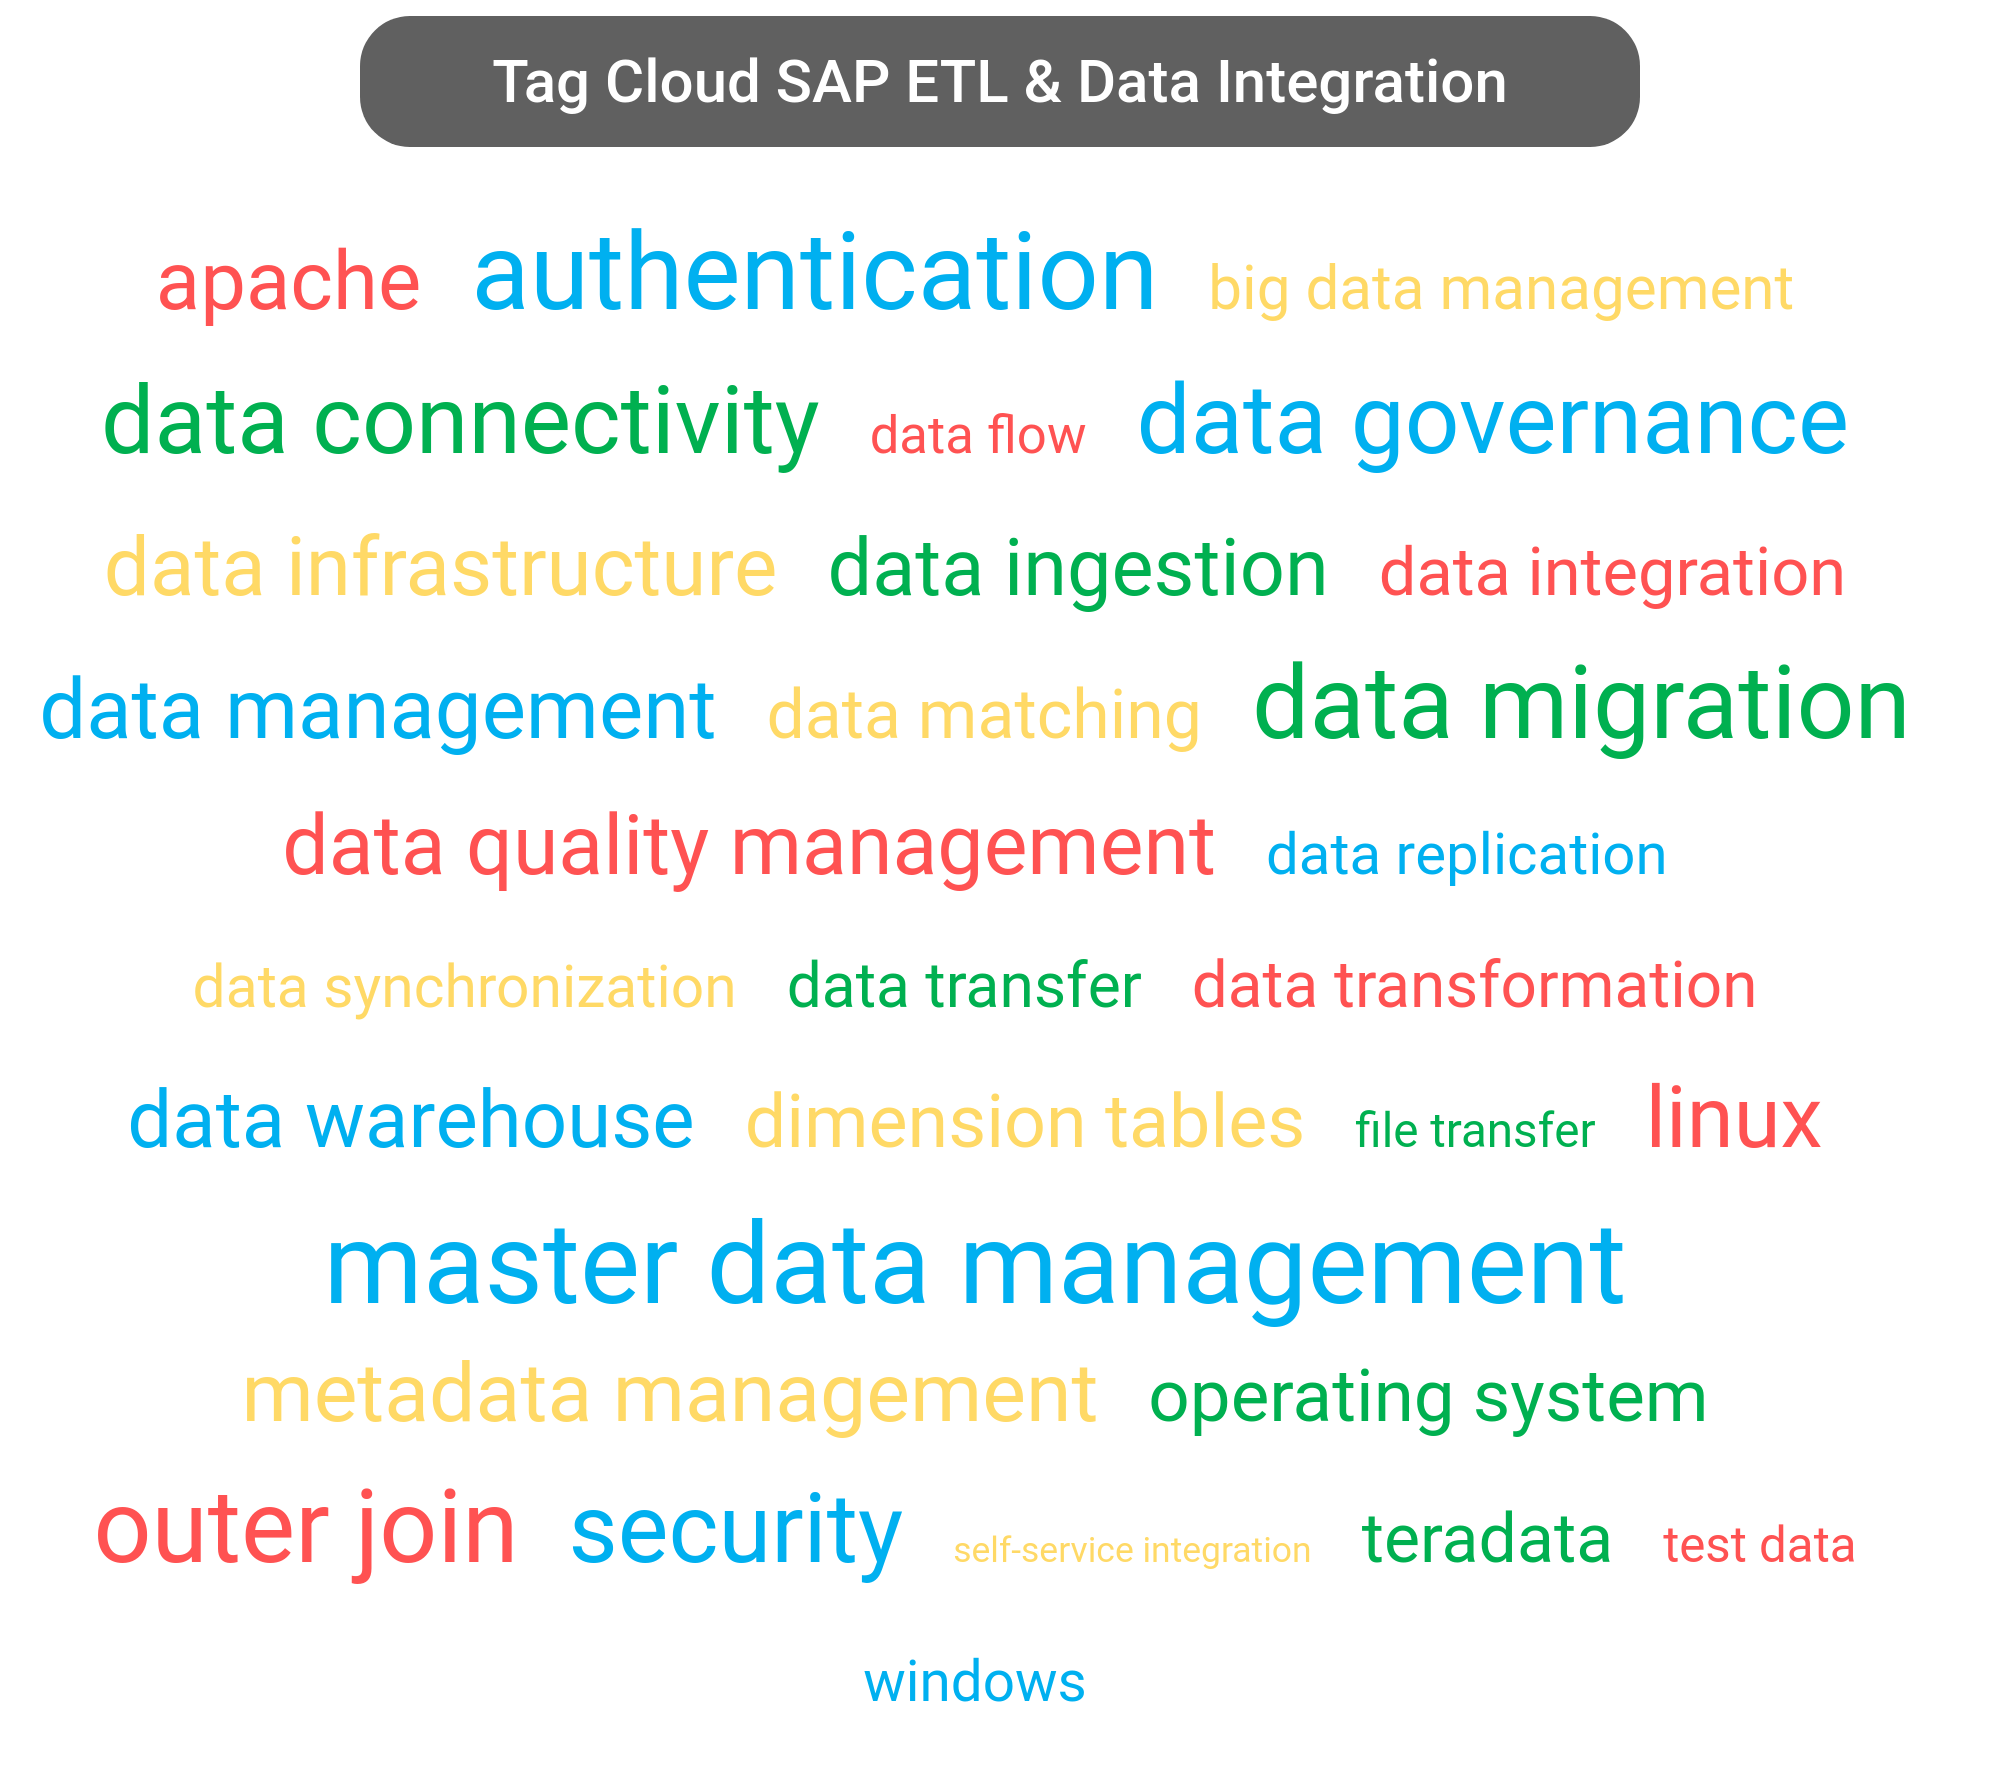 Tag cloud of the SAP Data Integration software.